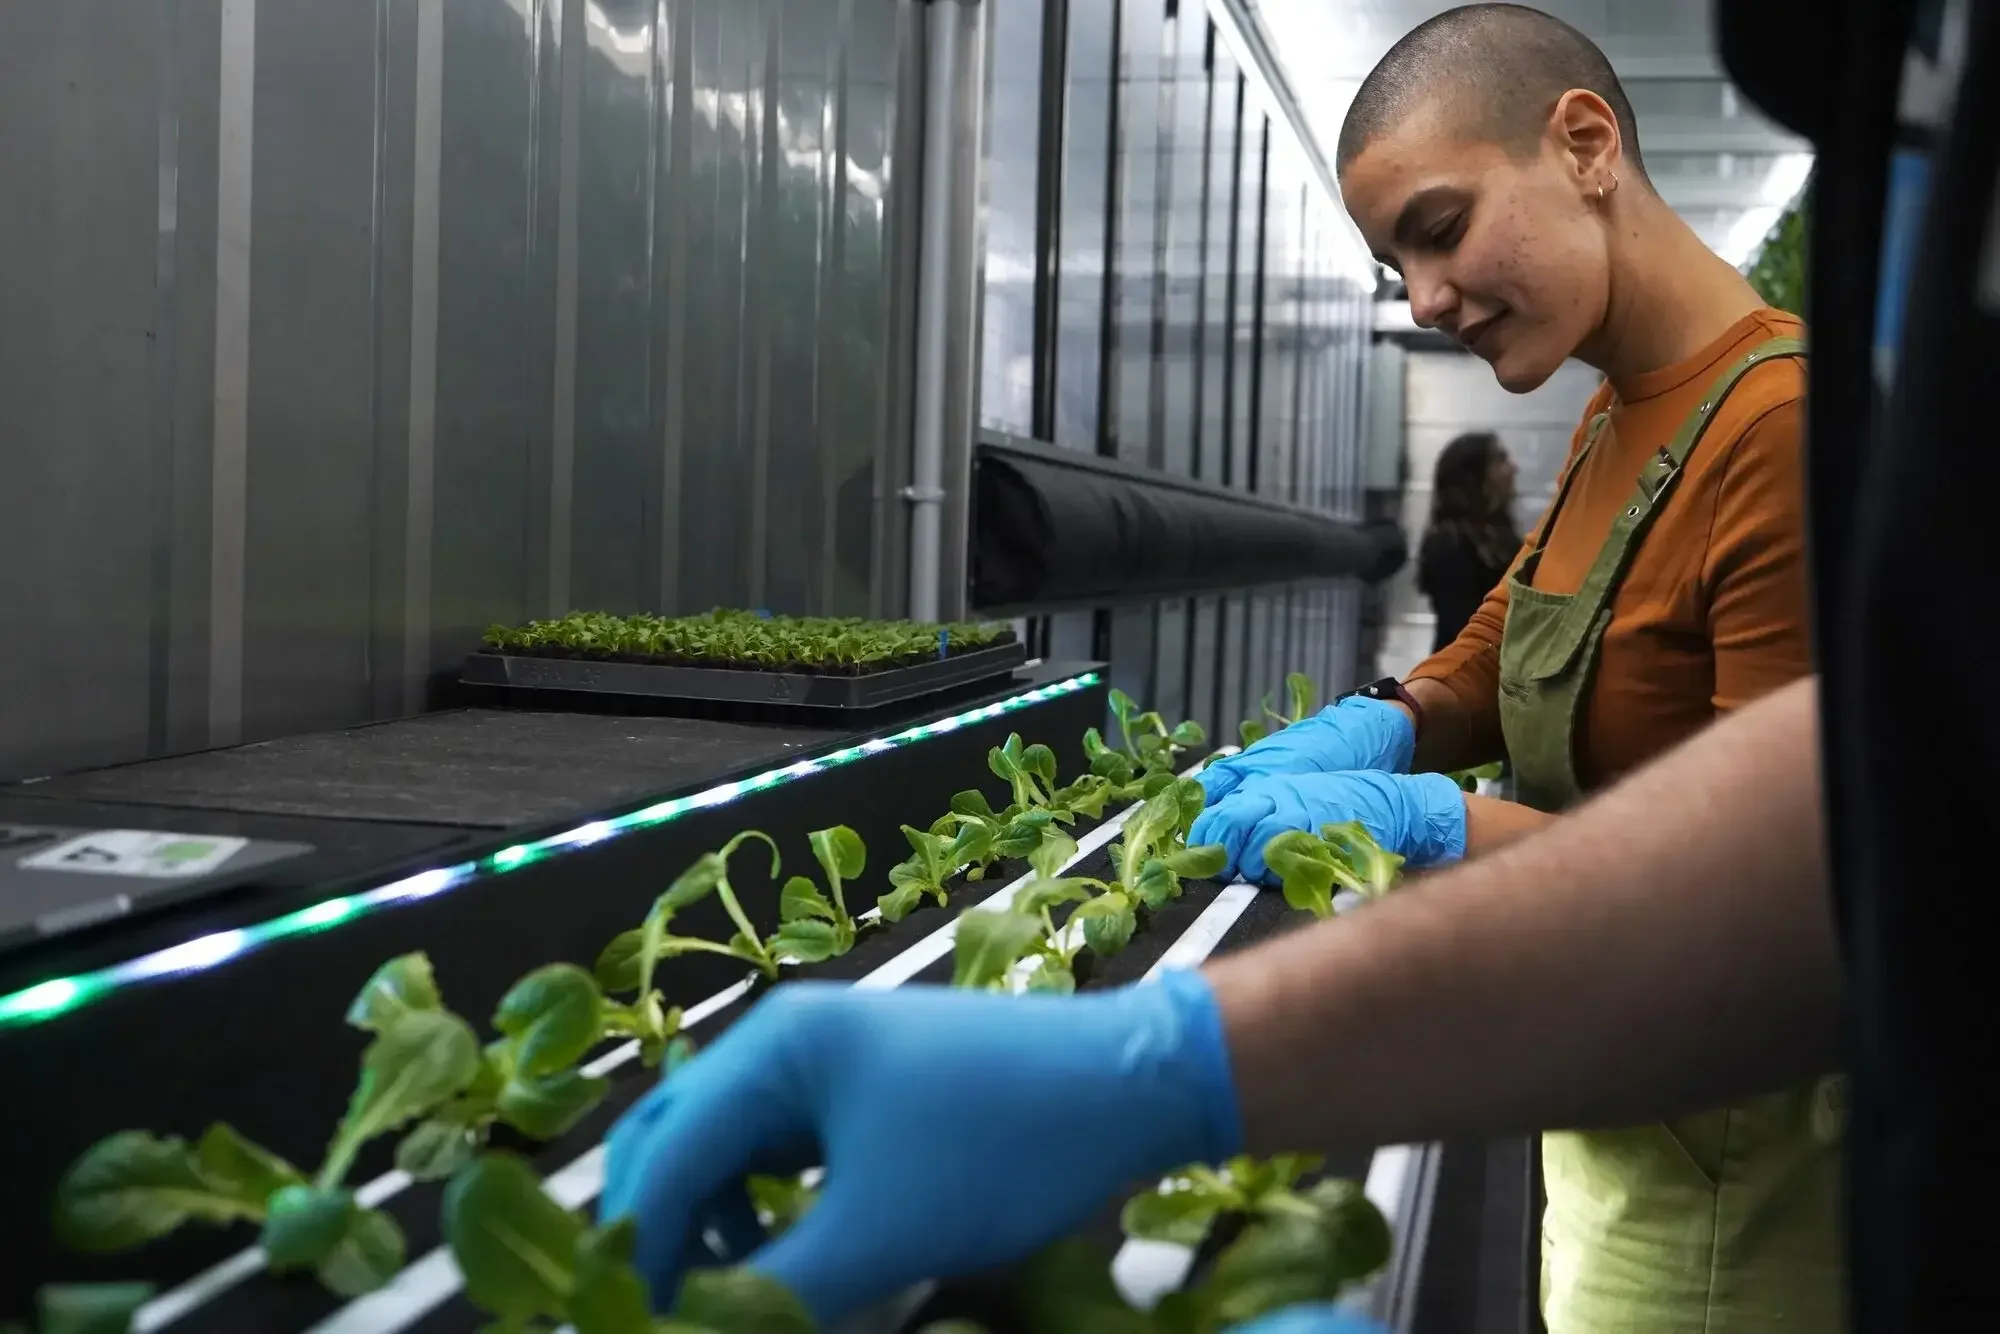 Farmers work inside a hydroponic shipping container farm.